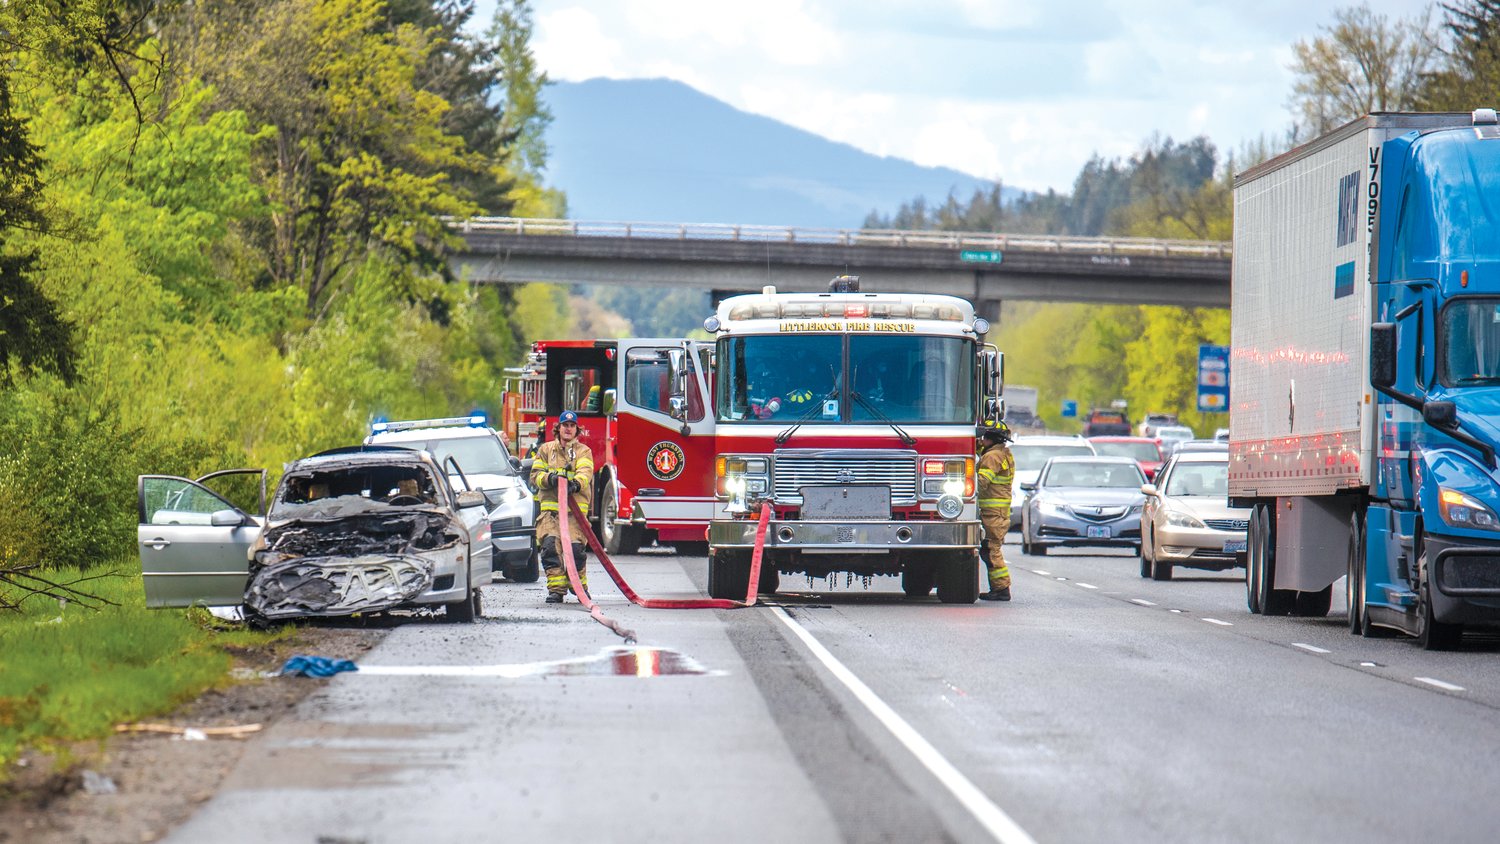 Crews from Littlerock Fire and Rescue Station 4 and the Riverside Fire Authority respond to a car fire in the southbound lane of Interstate 5 near milepost 86 Tuesday afternoon near Grand Mound. There were no reports of injuries.